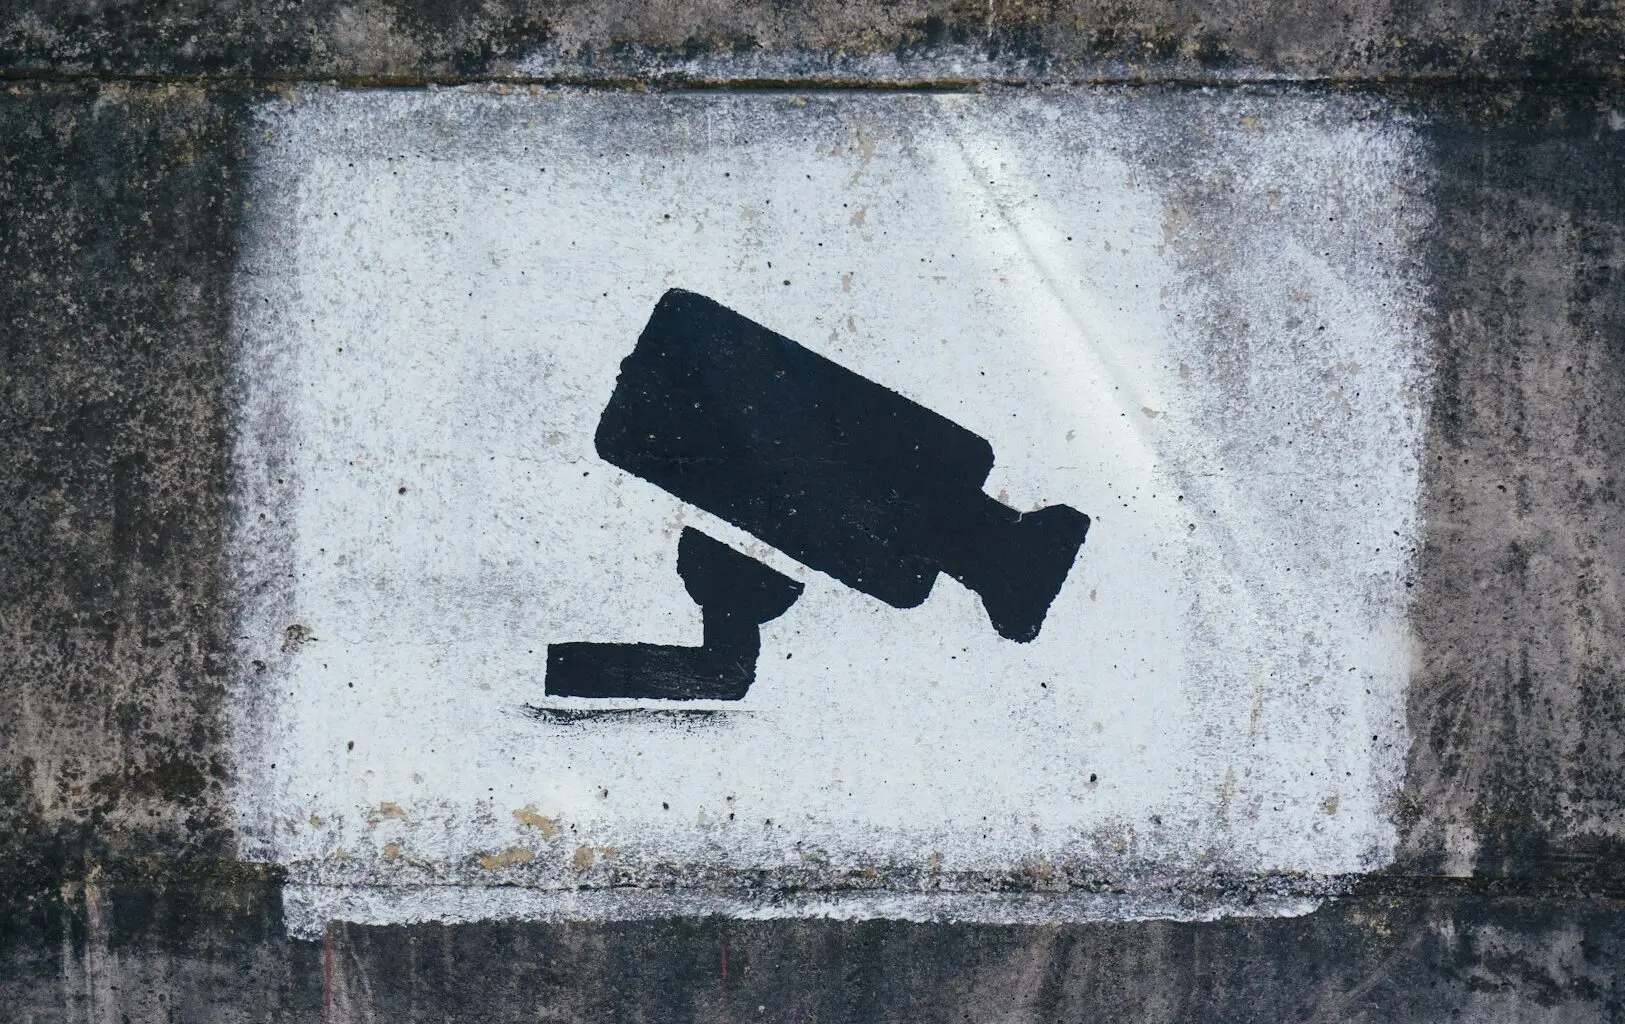 A stenciled image of a surveillance camera on a textured wall.